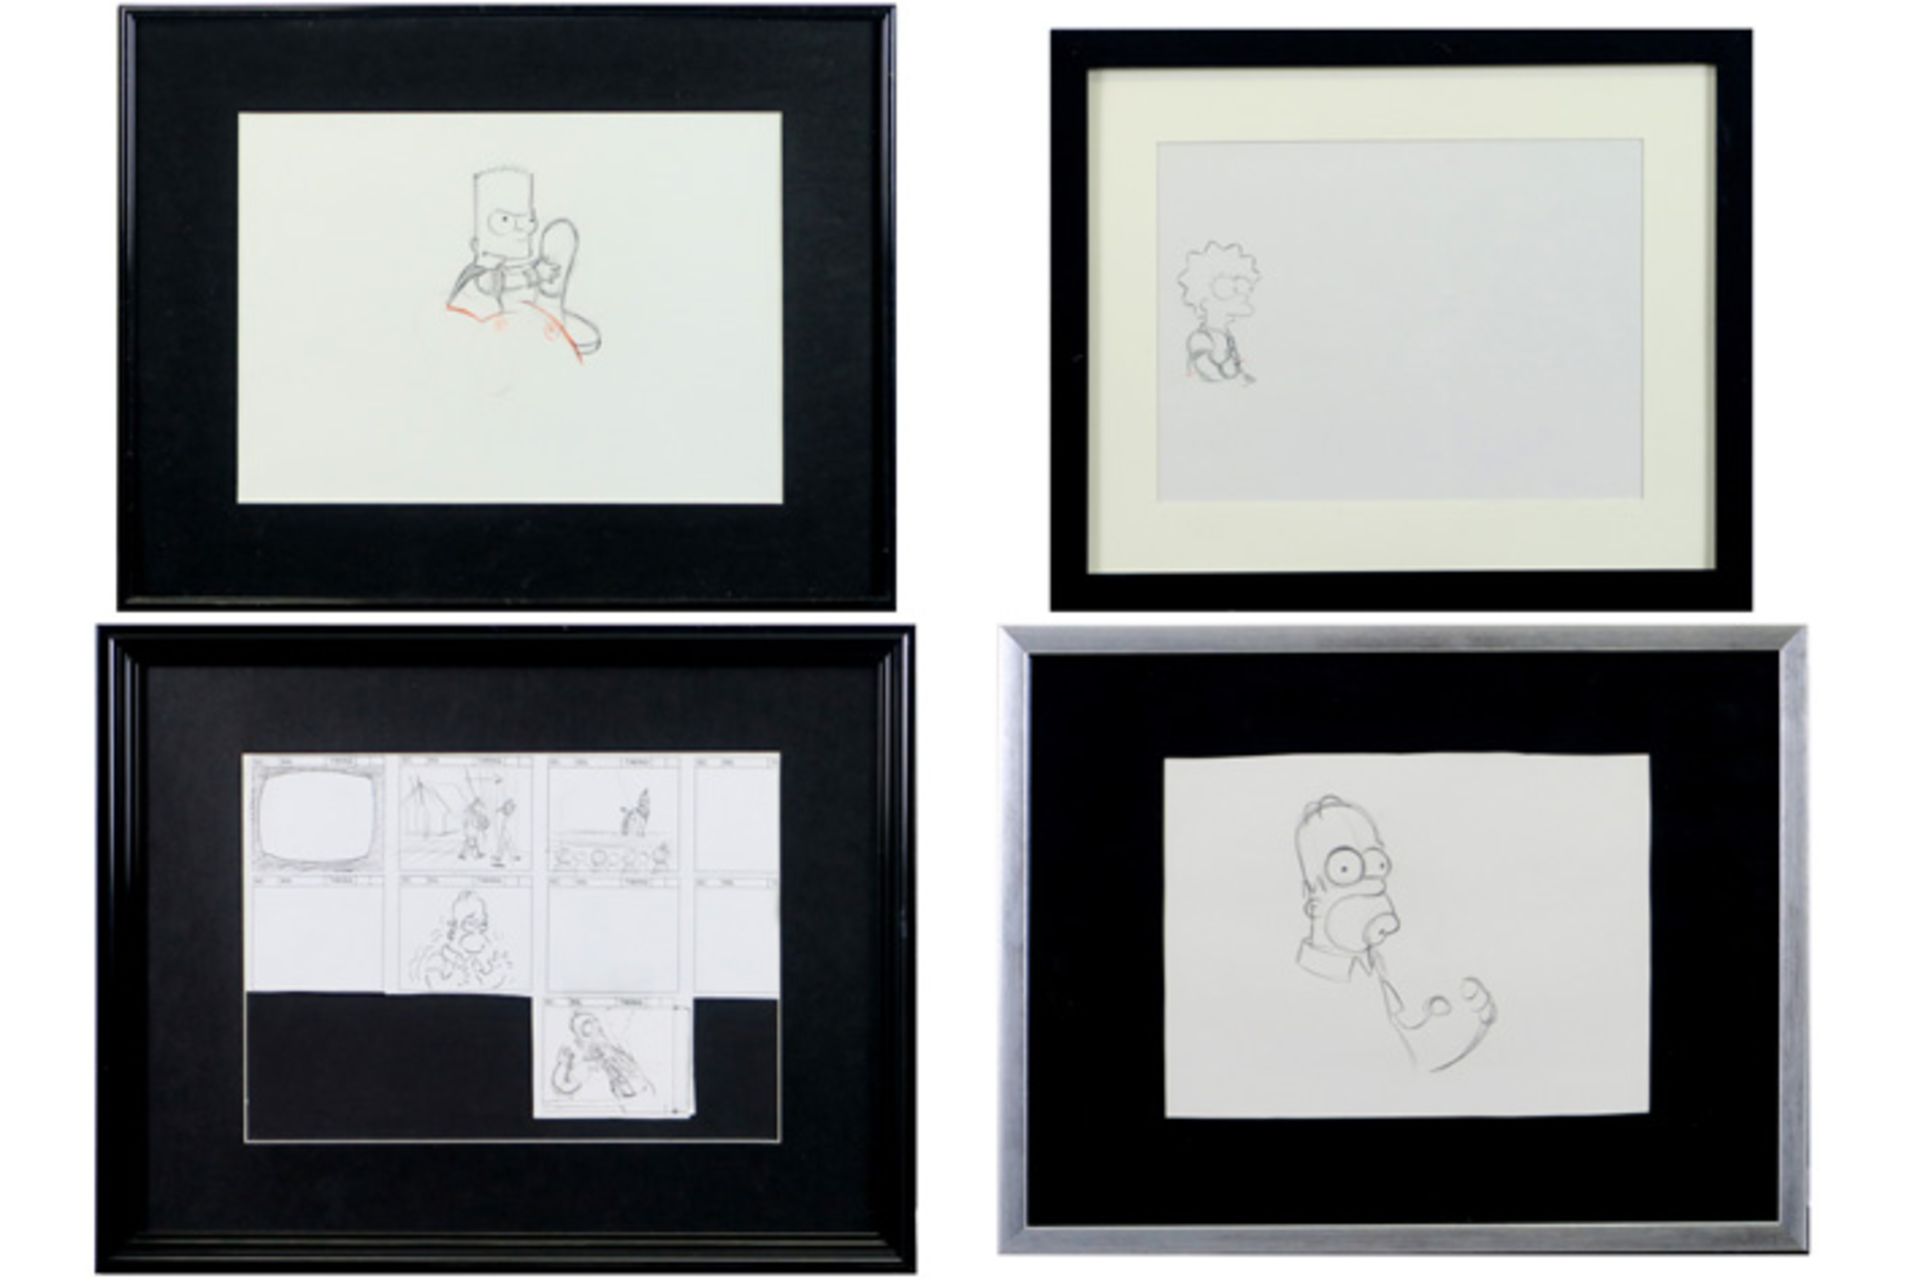 three drawings and a story-board drawing by Matt(hew Abram) Groening for "The Simpsons" - each